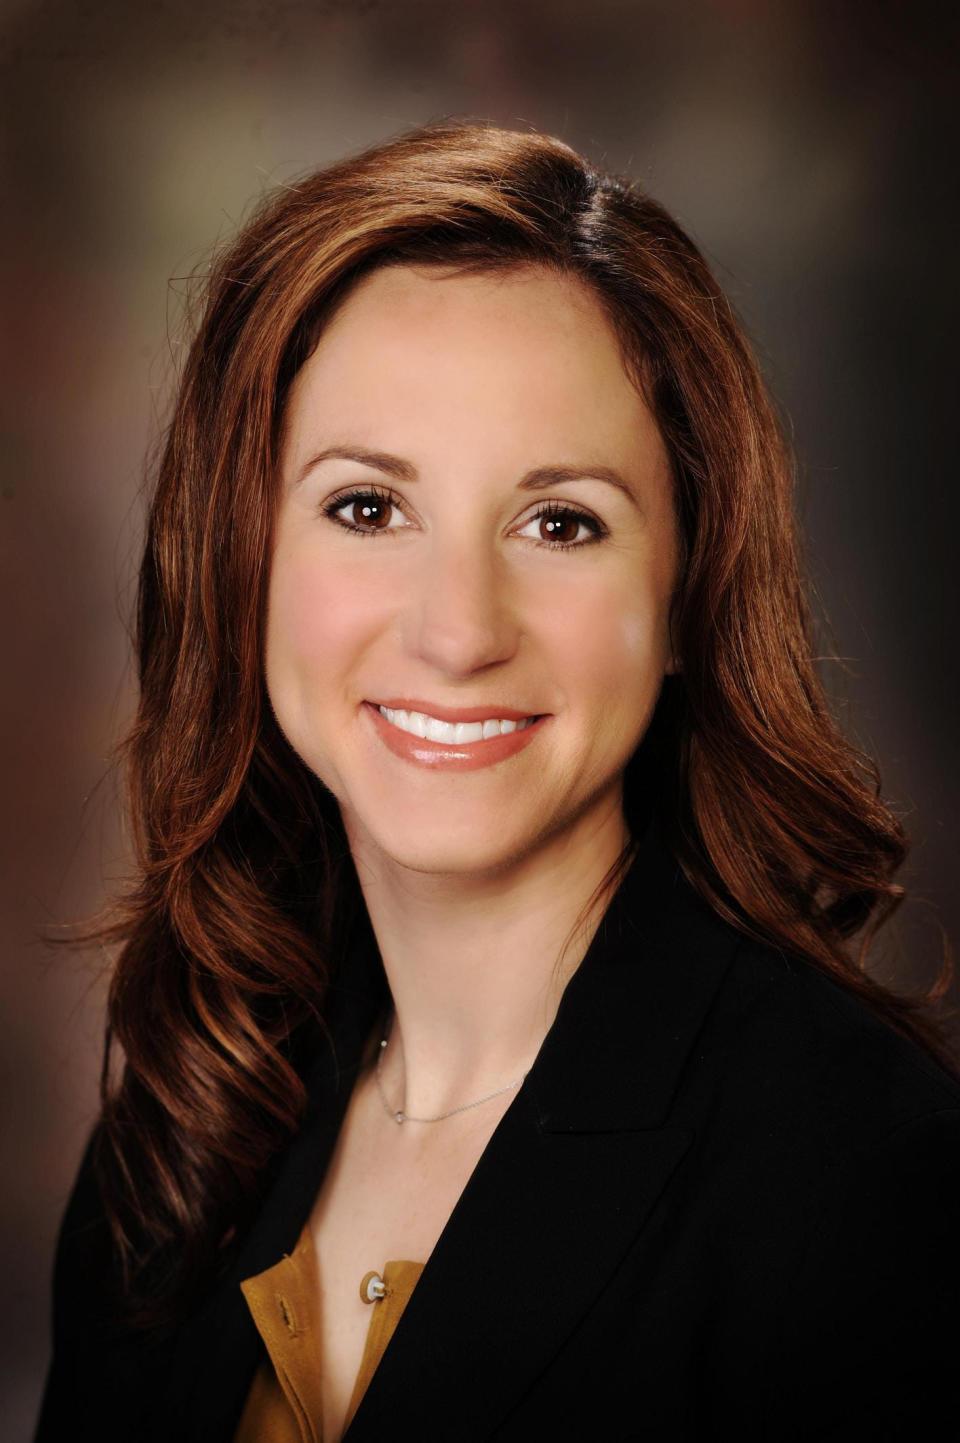 Amy Hecht is the vice president for student affairs at Florida State University.